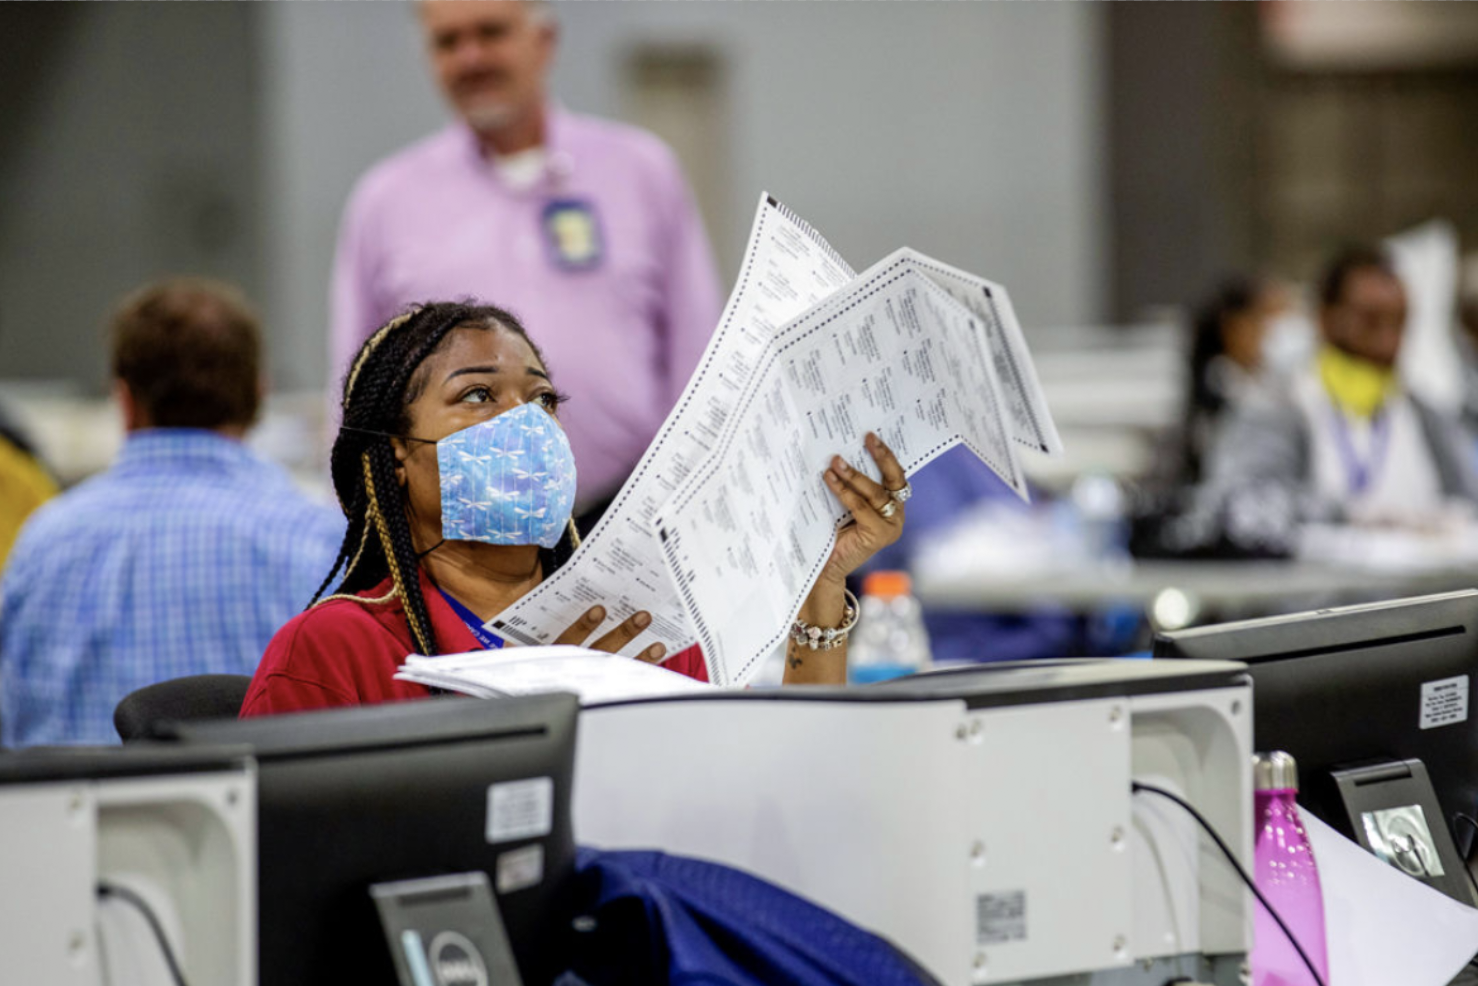 Voting by mail hasnât given a big advantage to one political party, but Republican rhetoric could change the dynamic for Novemberâs election. ALYSSA POINTER/ATLANTA JOURNAL-CONSTITUTION VIA AP